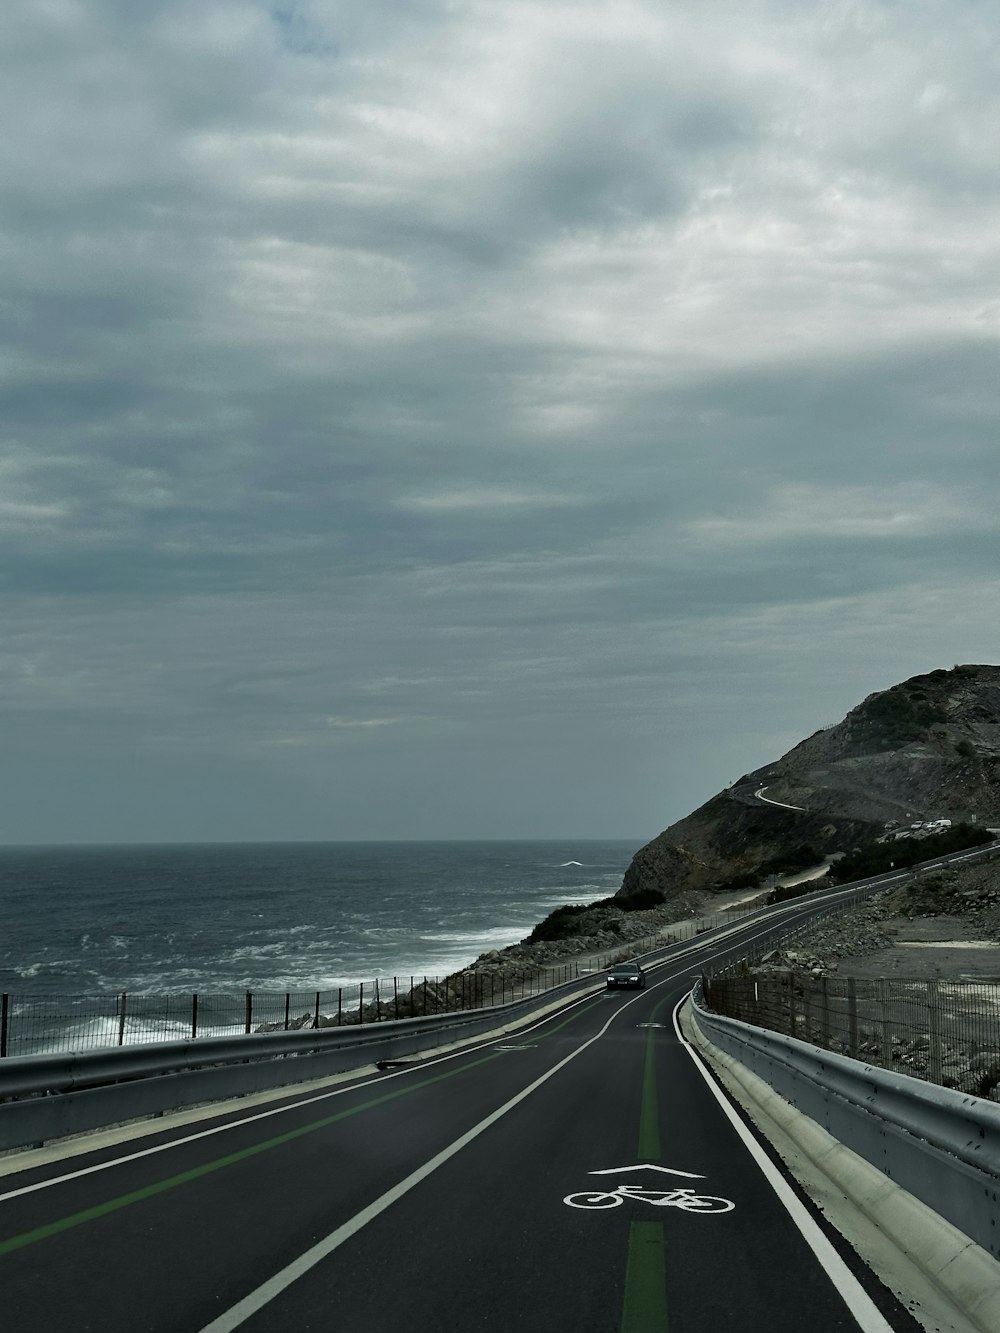 a view of the ocean from a highway